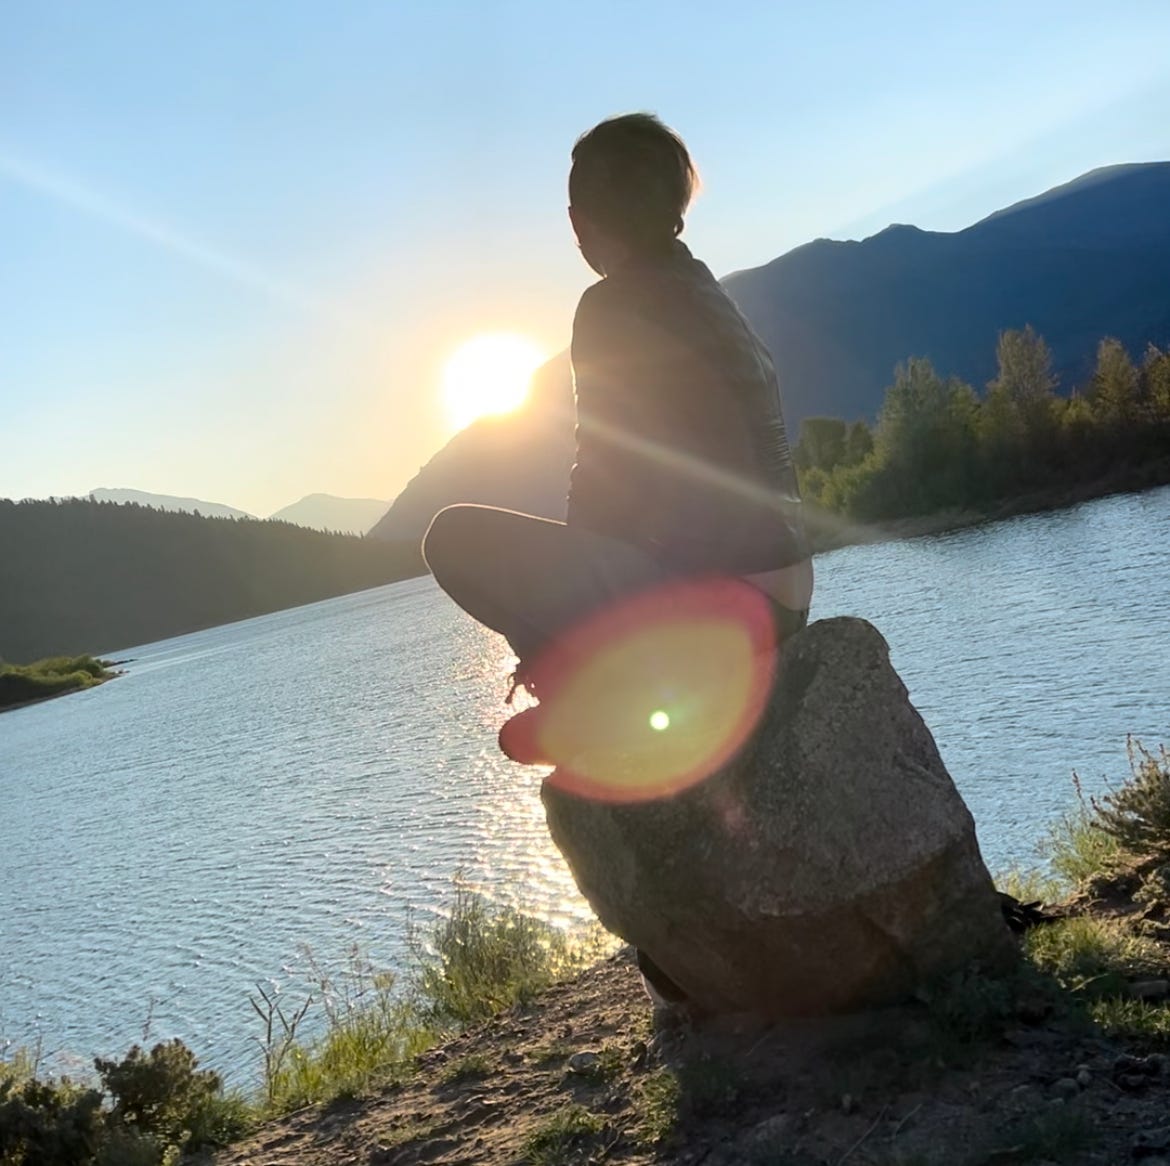 Lyric sits on a log, overlooking a lake and beautiful mountains as the sunsets.